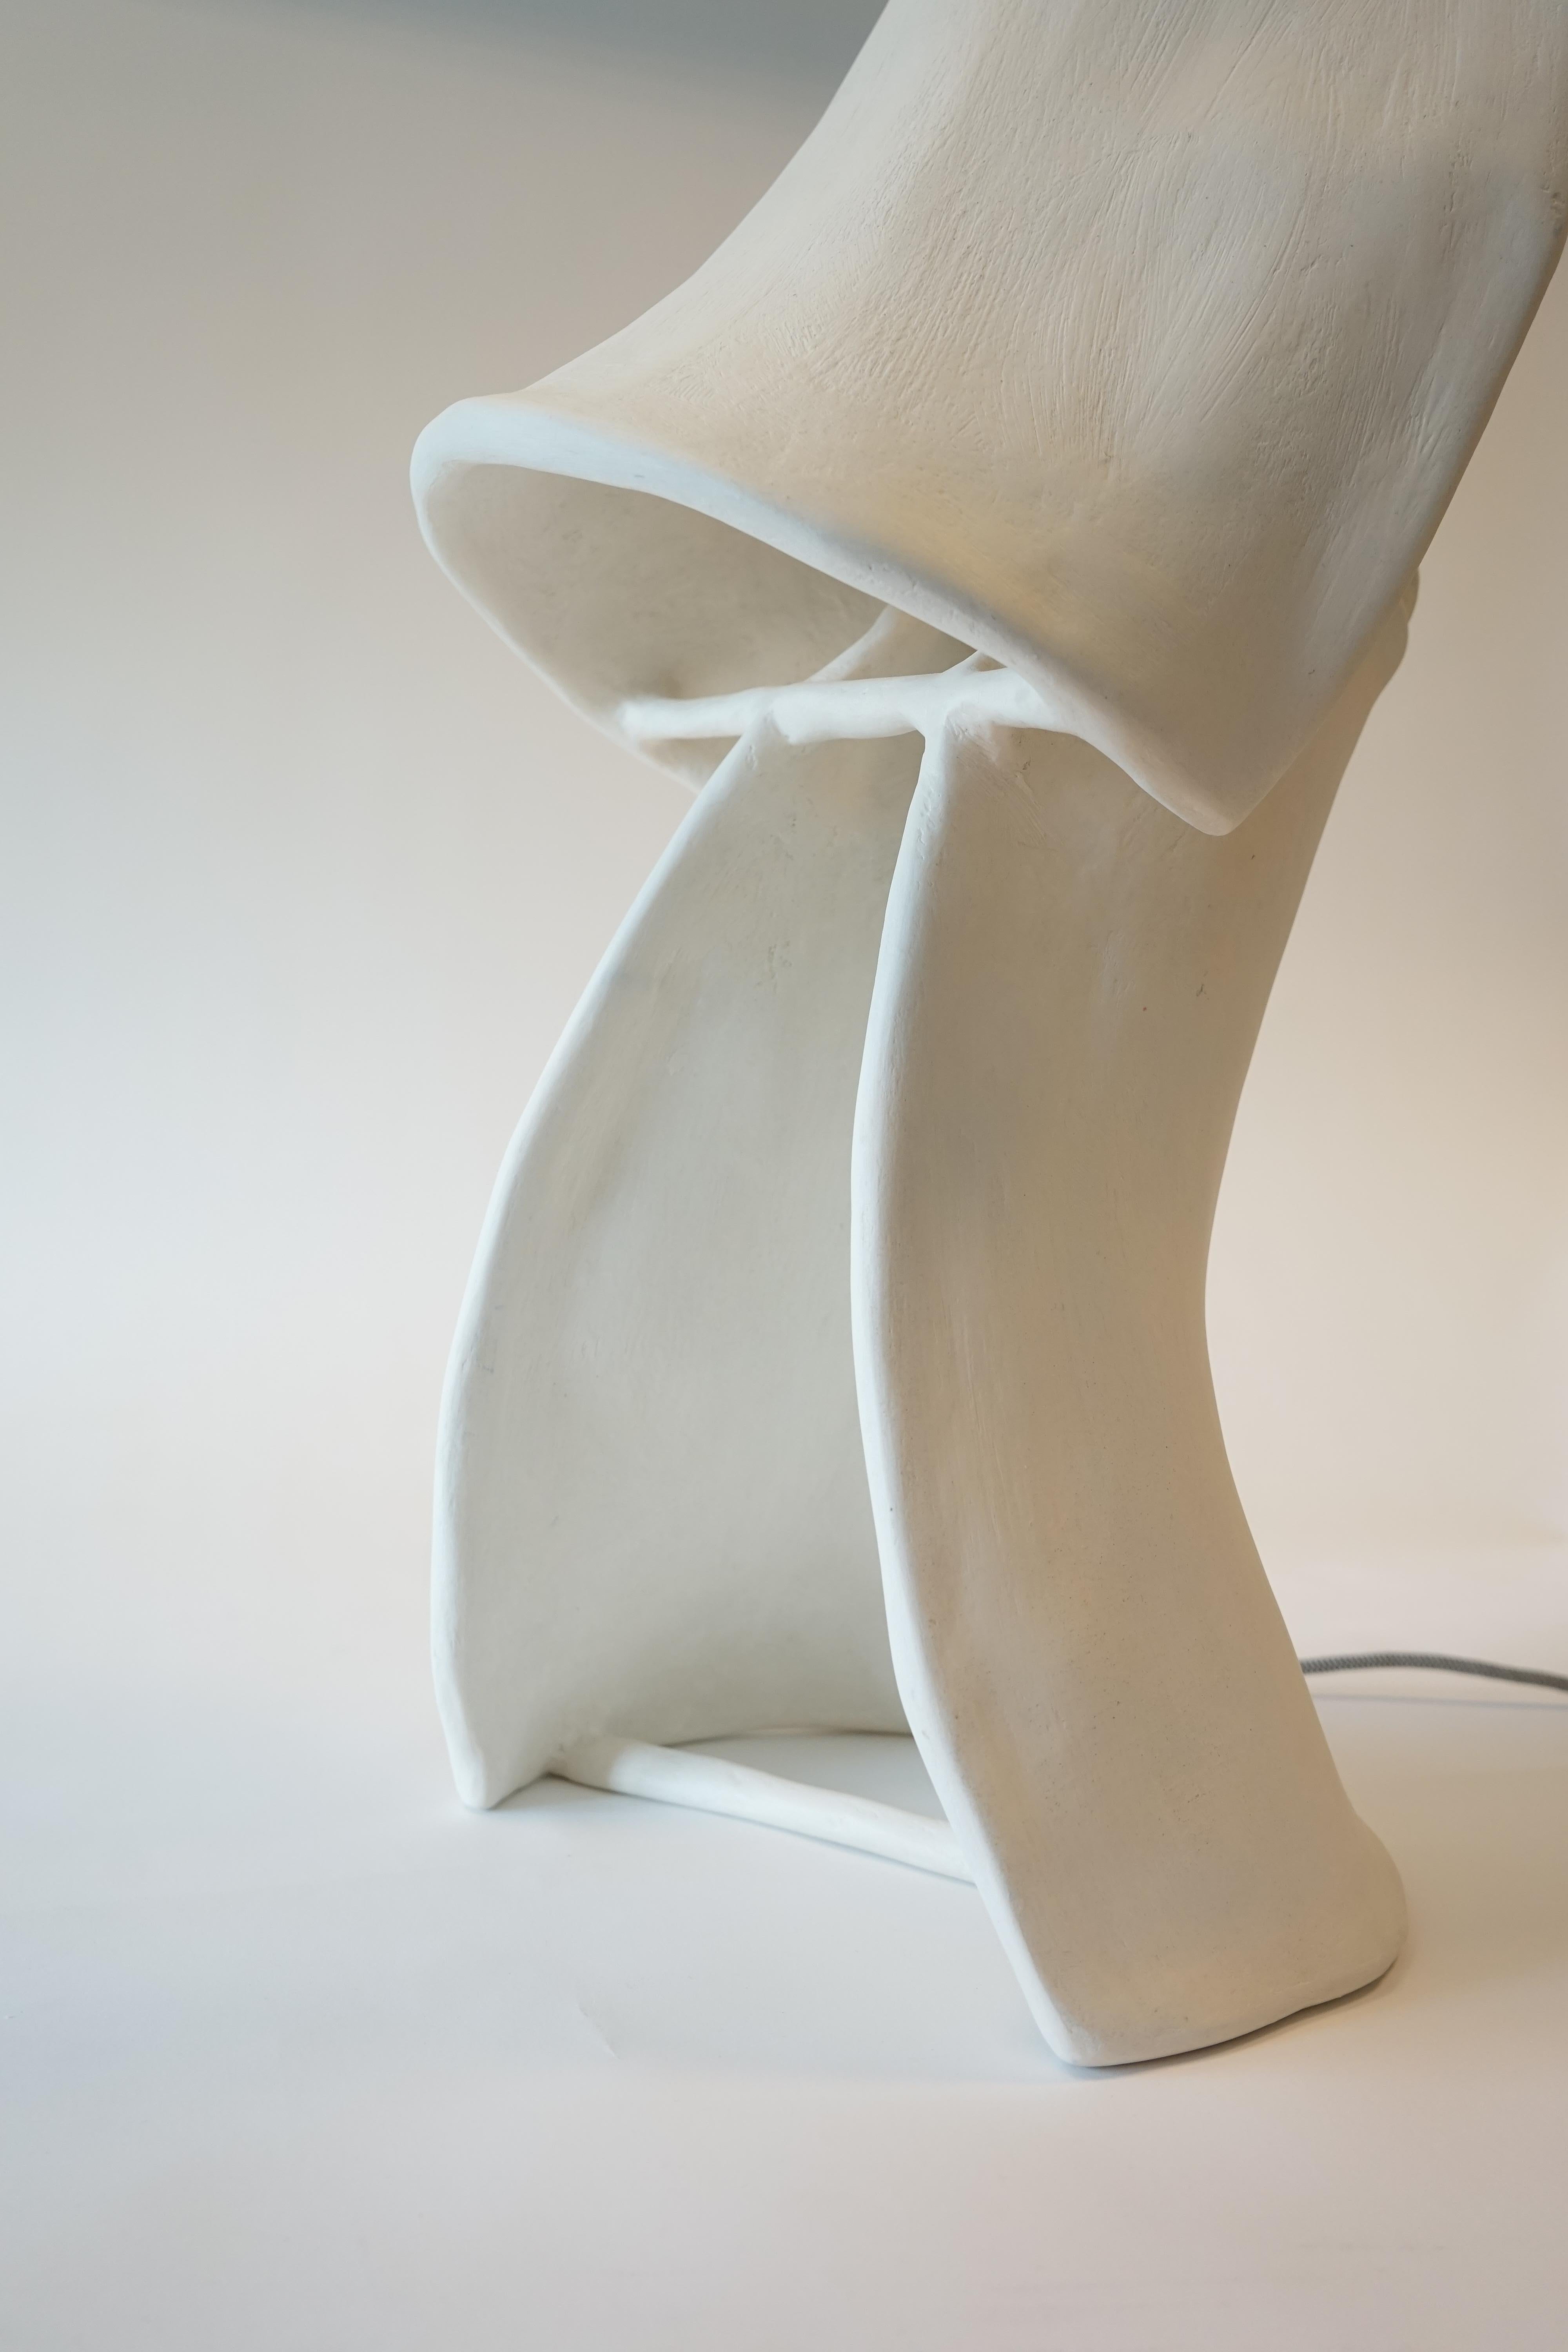 Lacquered Contemporary Design White Textured Curved Sculptures Lamp by Jordan van der Ven For Sale